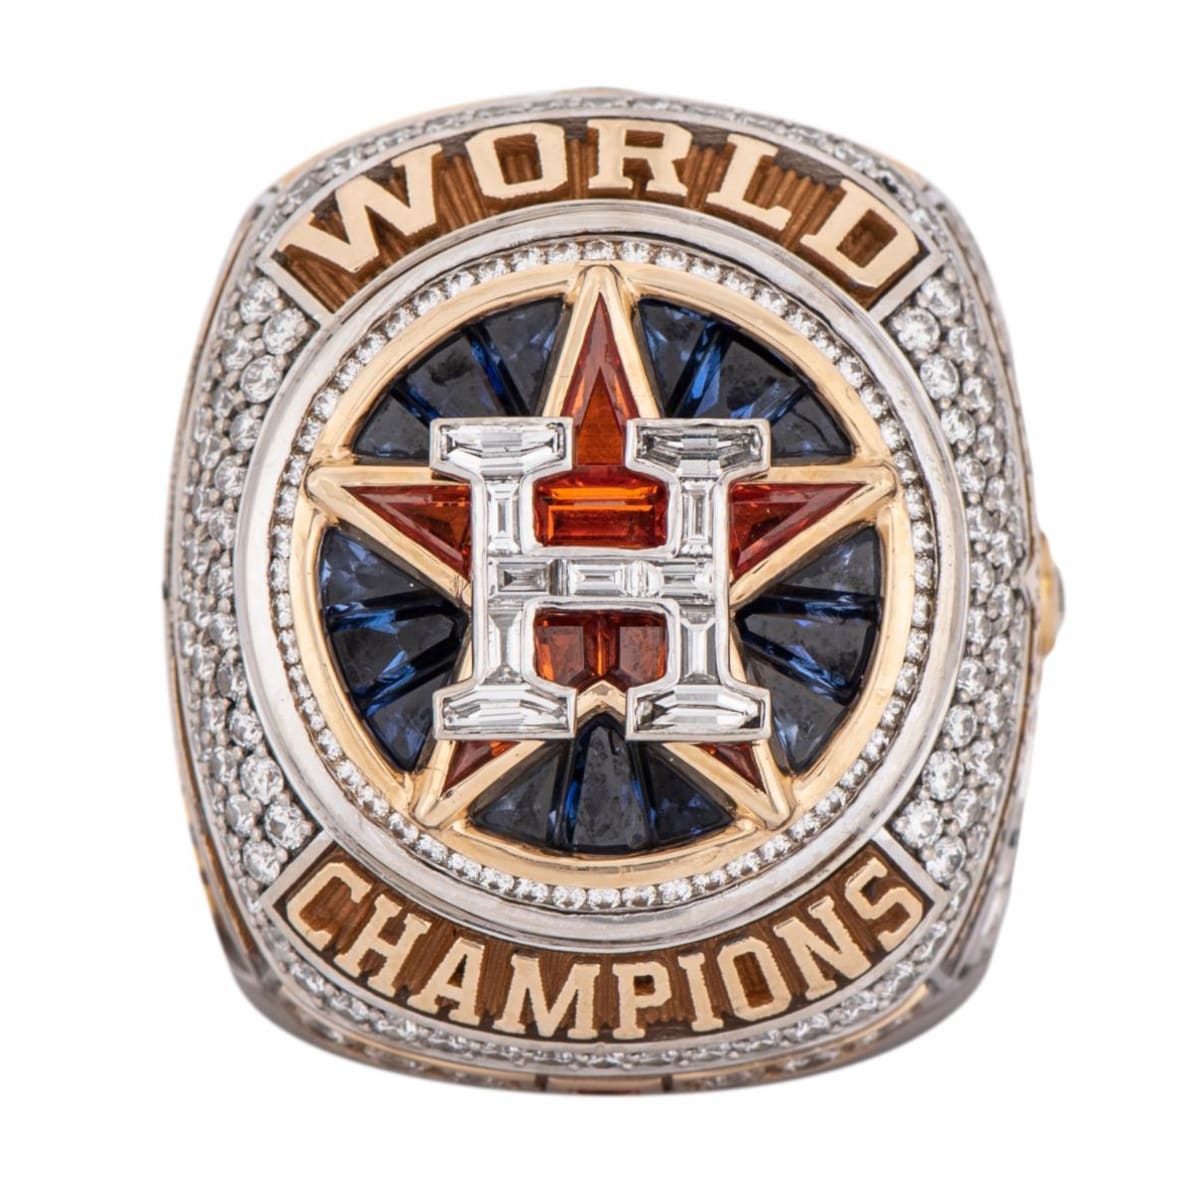 Houston Astros demand 2017 World Series ring be pulled from auction -  Sports Collectors Digest